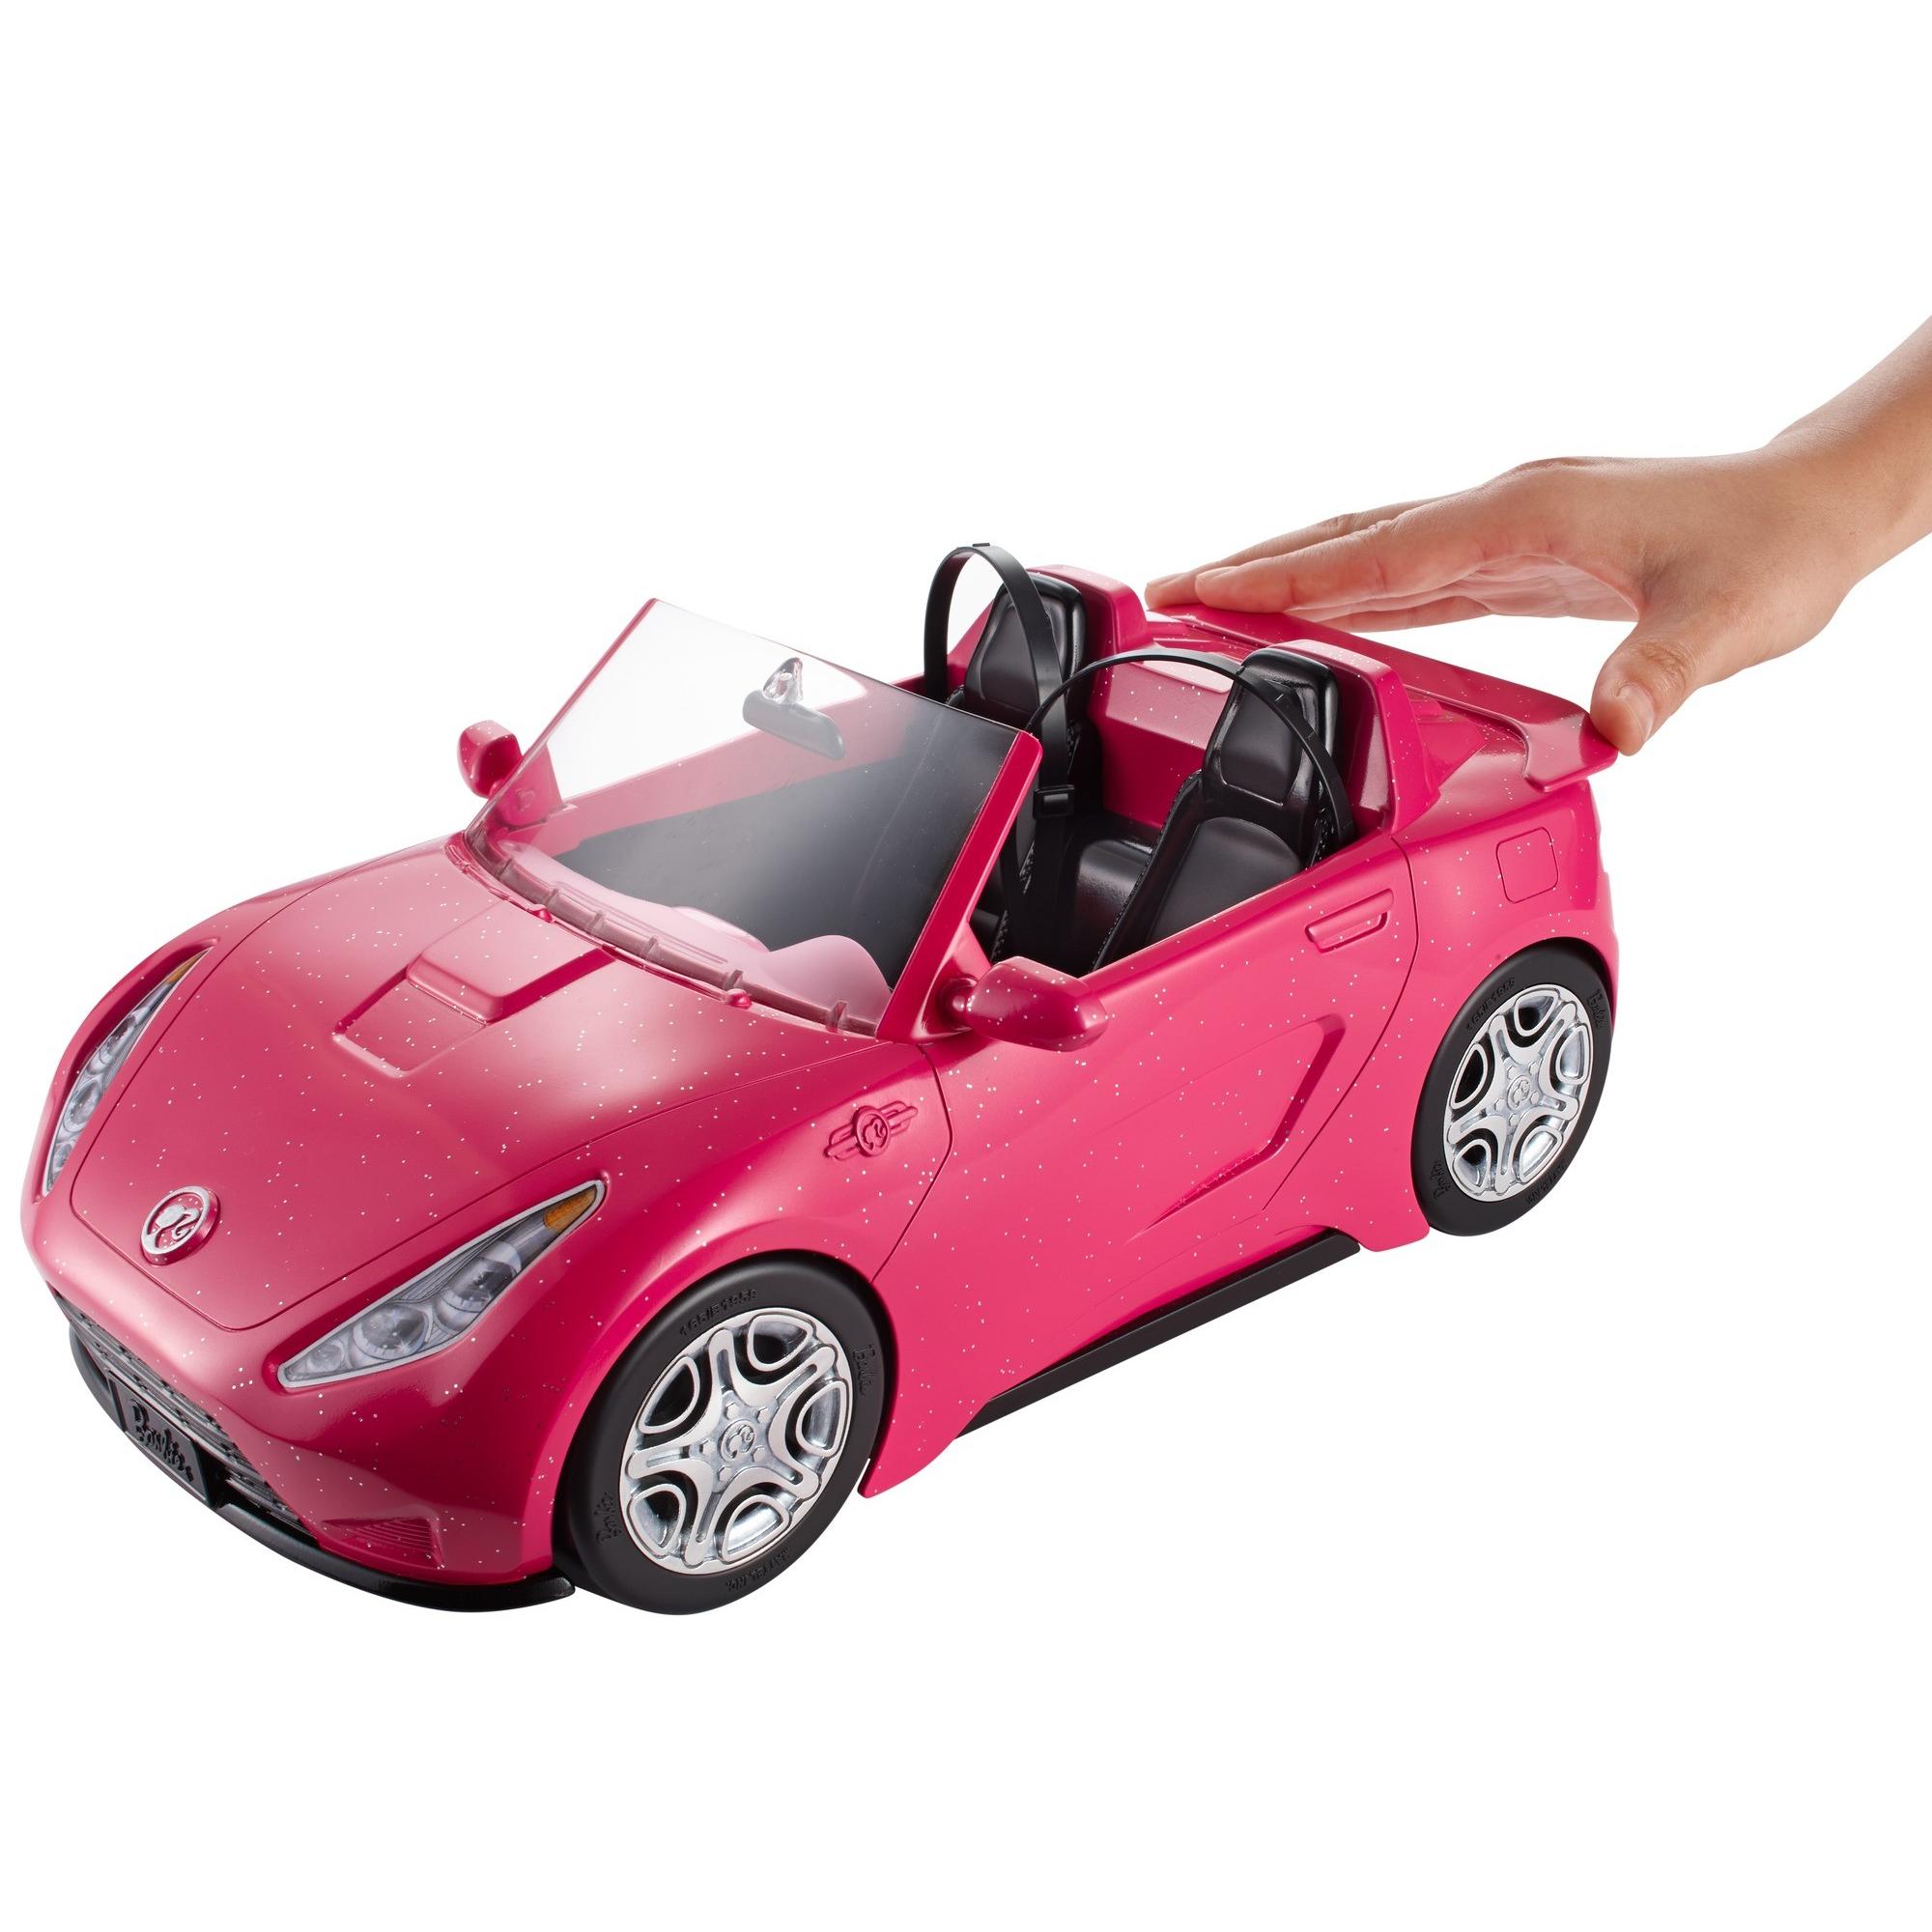 Barbie Convertible Toy Car, Sparkly Pink 2-Seater with Rolling Wheels - image 3 of 7